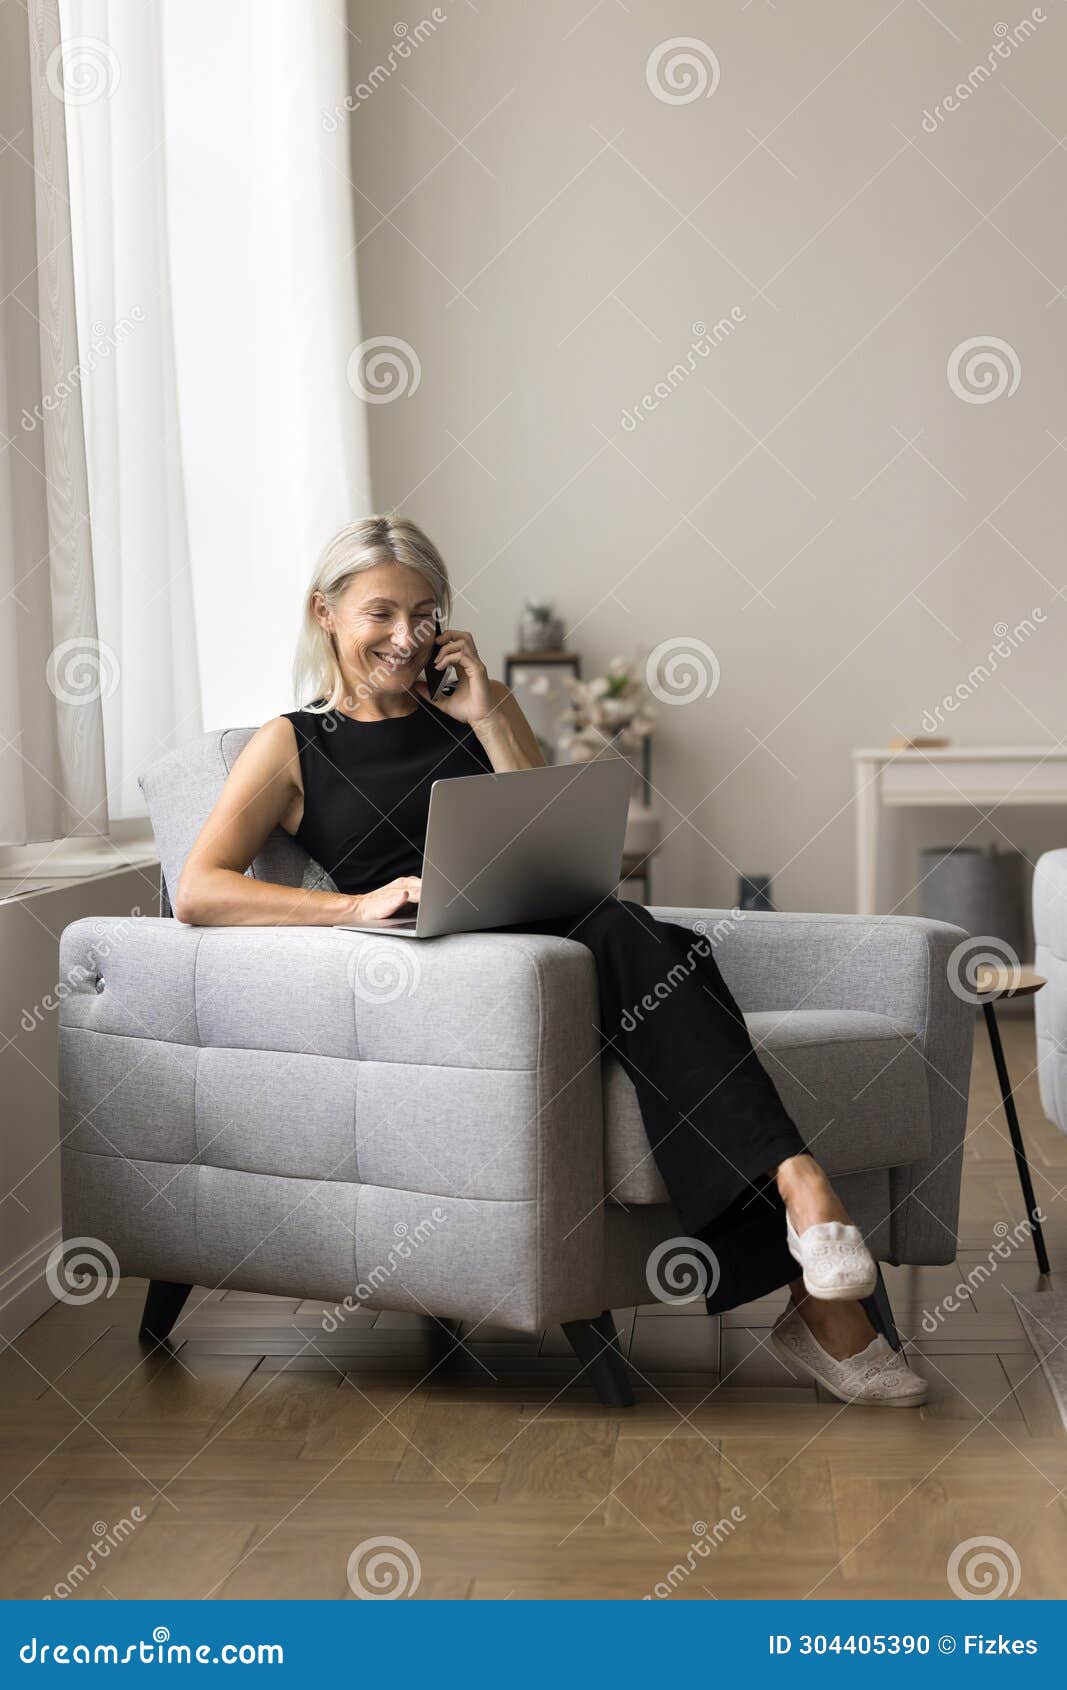 woman enjoy conversation on smartphone seated on armchair with laptop